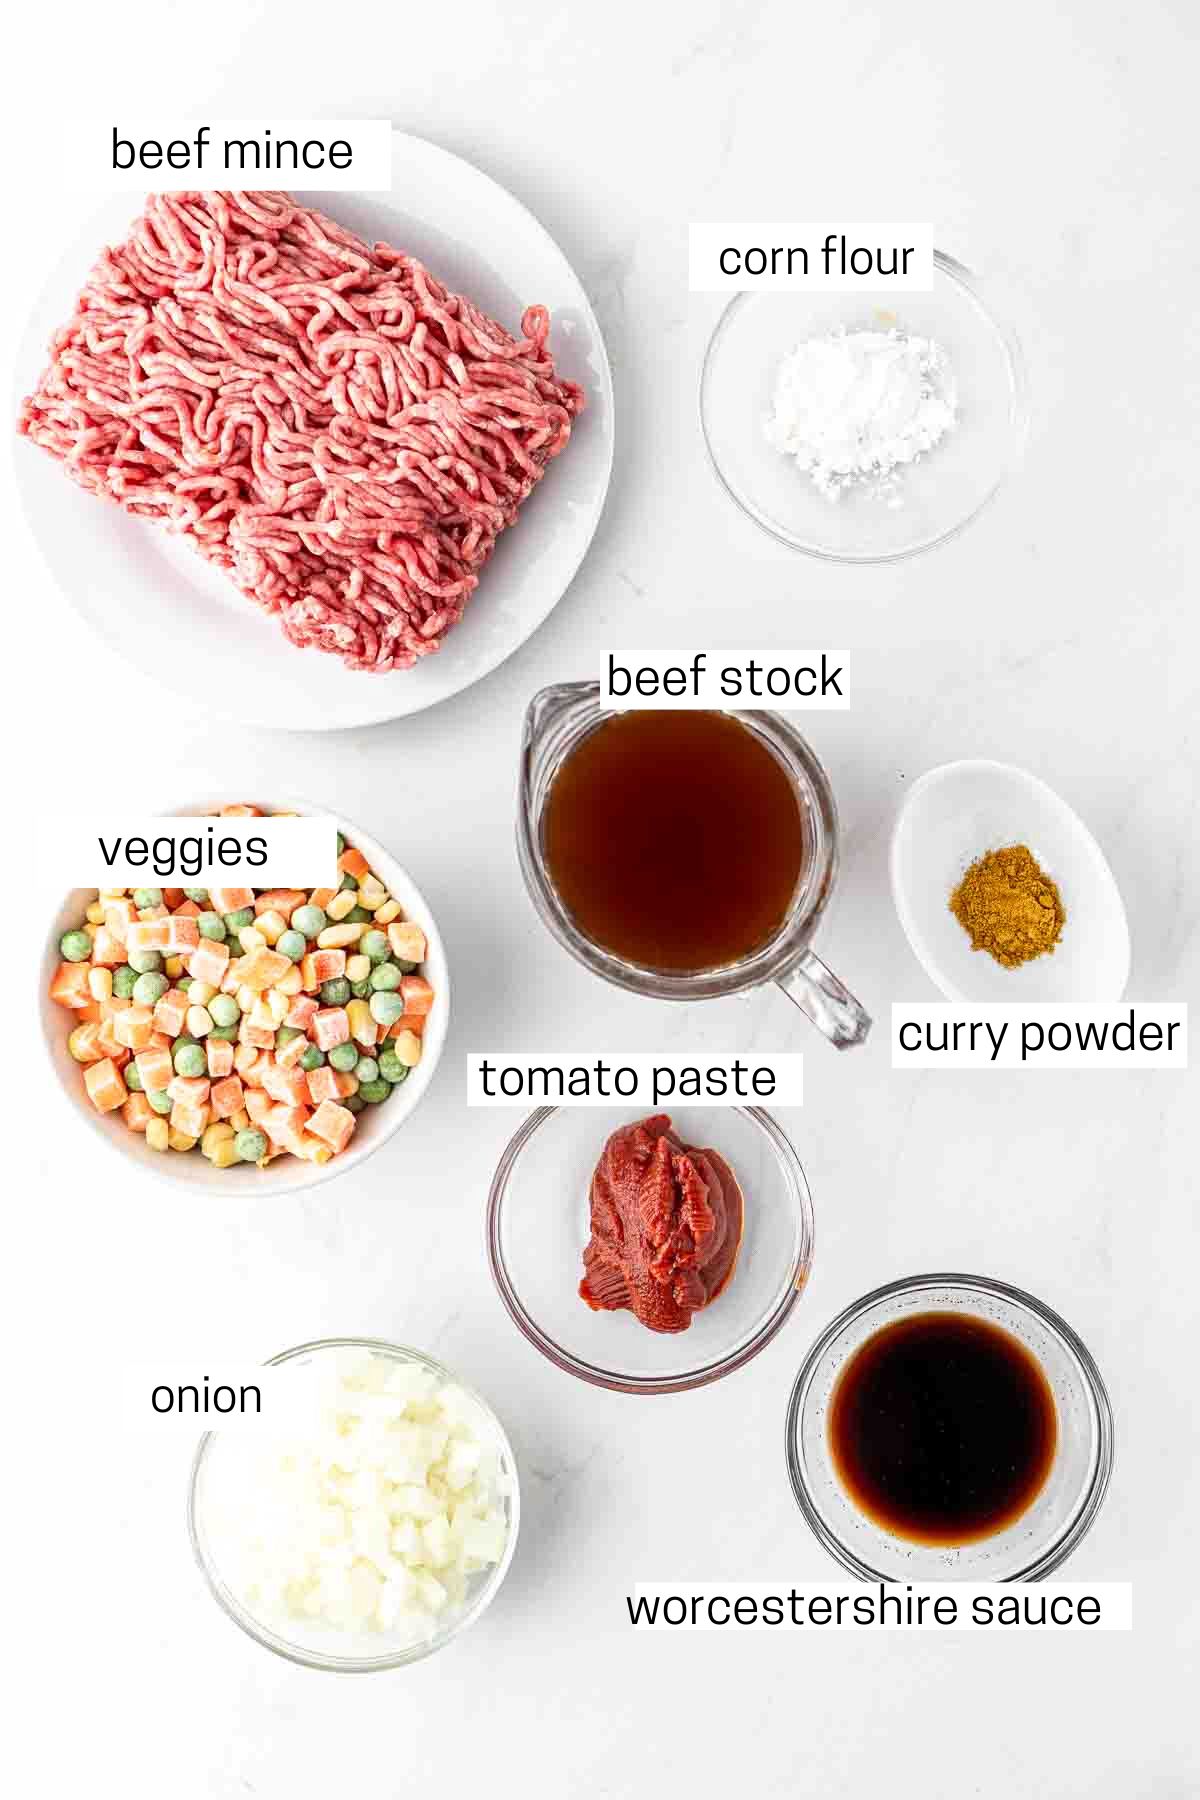 All ingredients needed for savoury mince laid out in bowls.